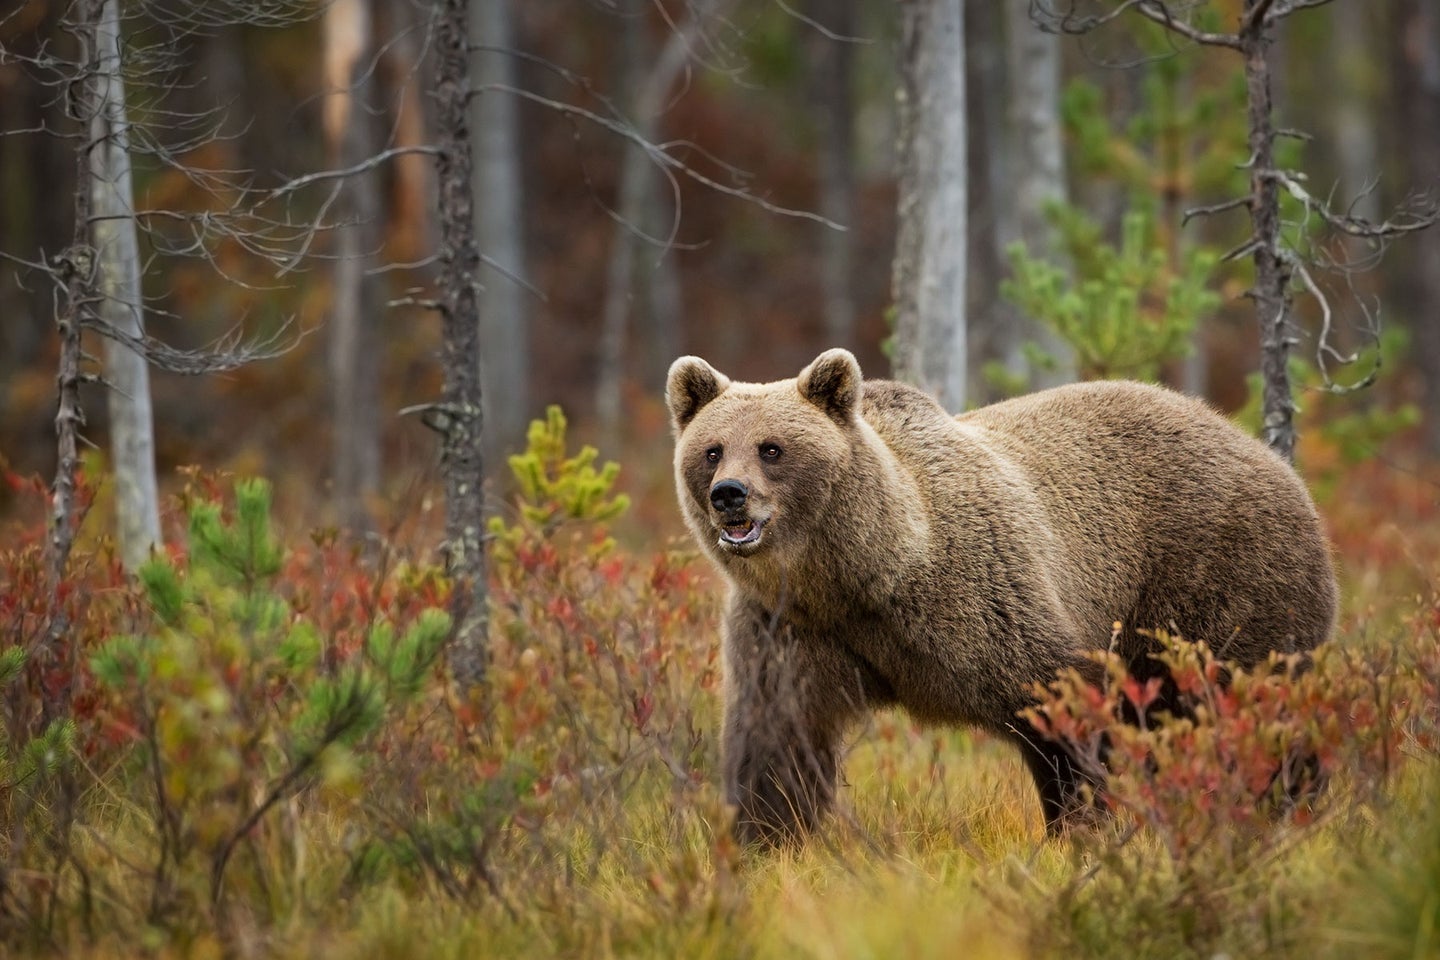 Sweden is home to an estimated 2,800 brown bears.